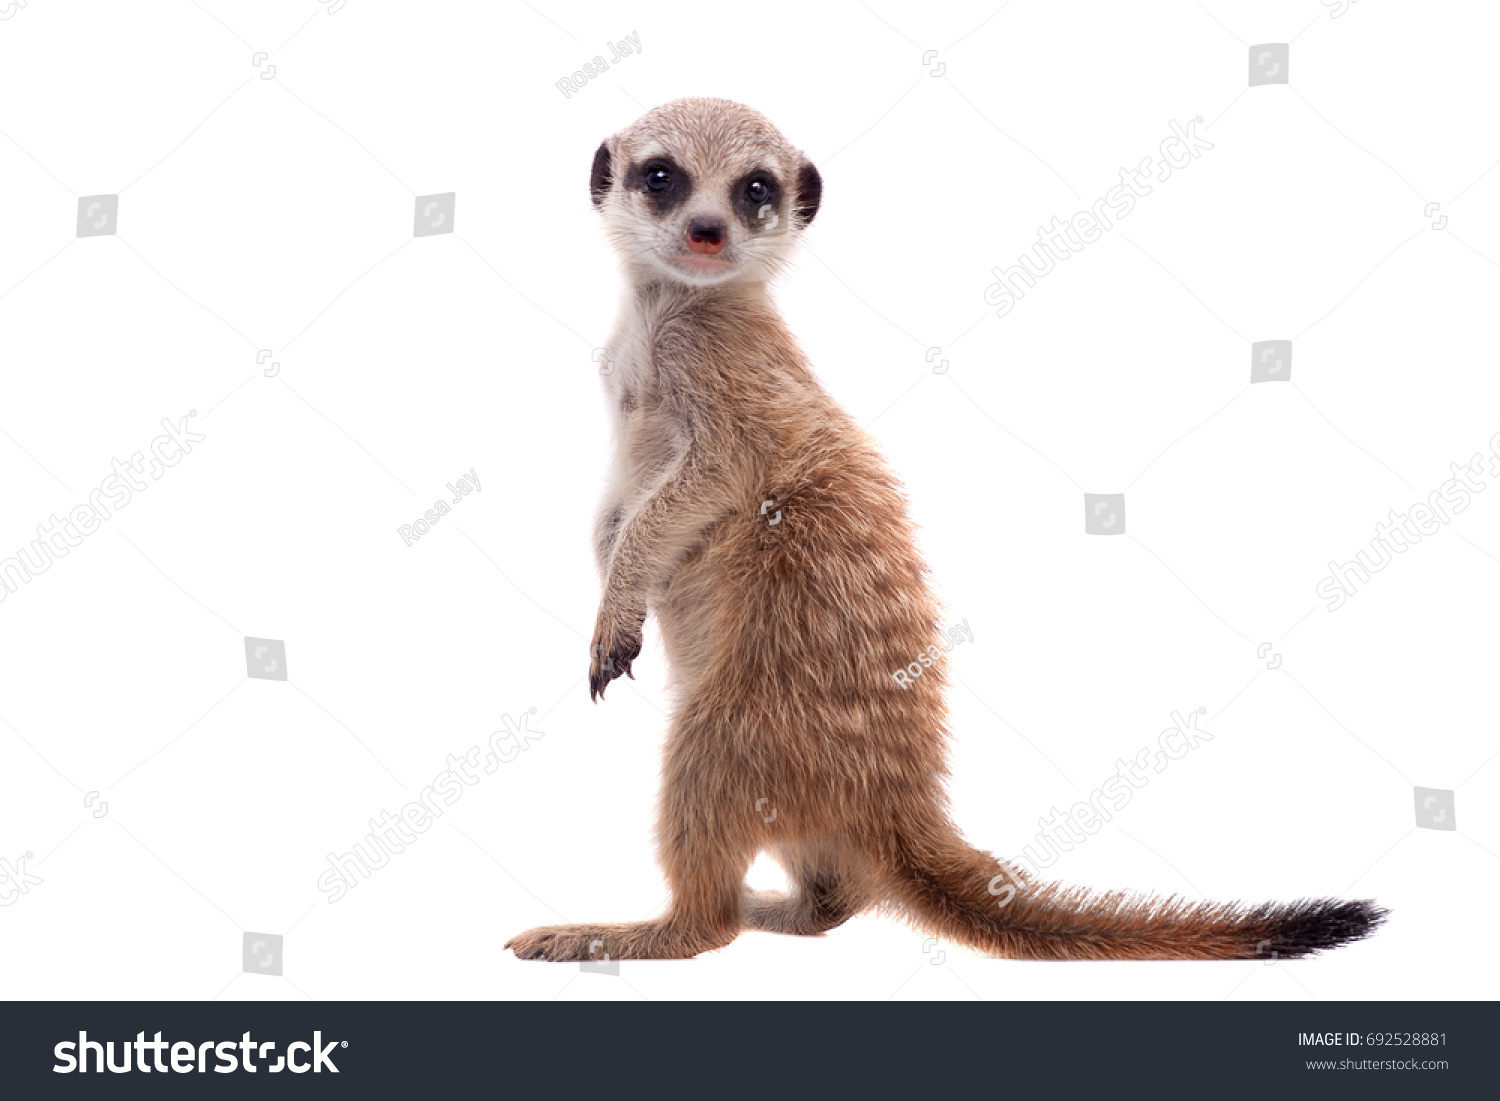 The meerkat or suricate cub, 2 month old, on white #692528881